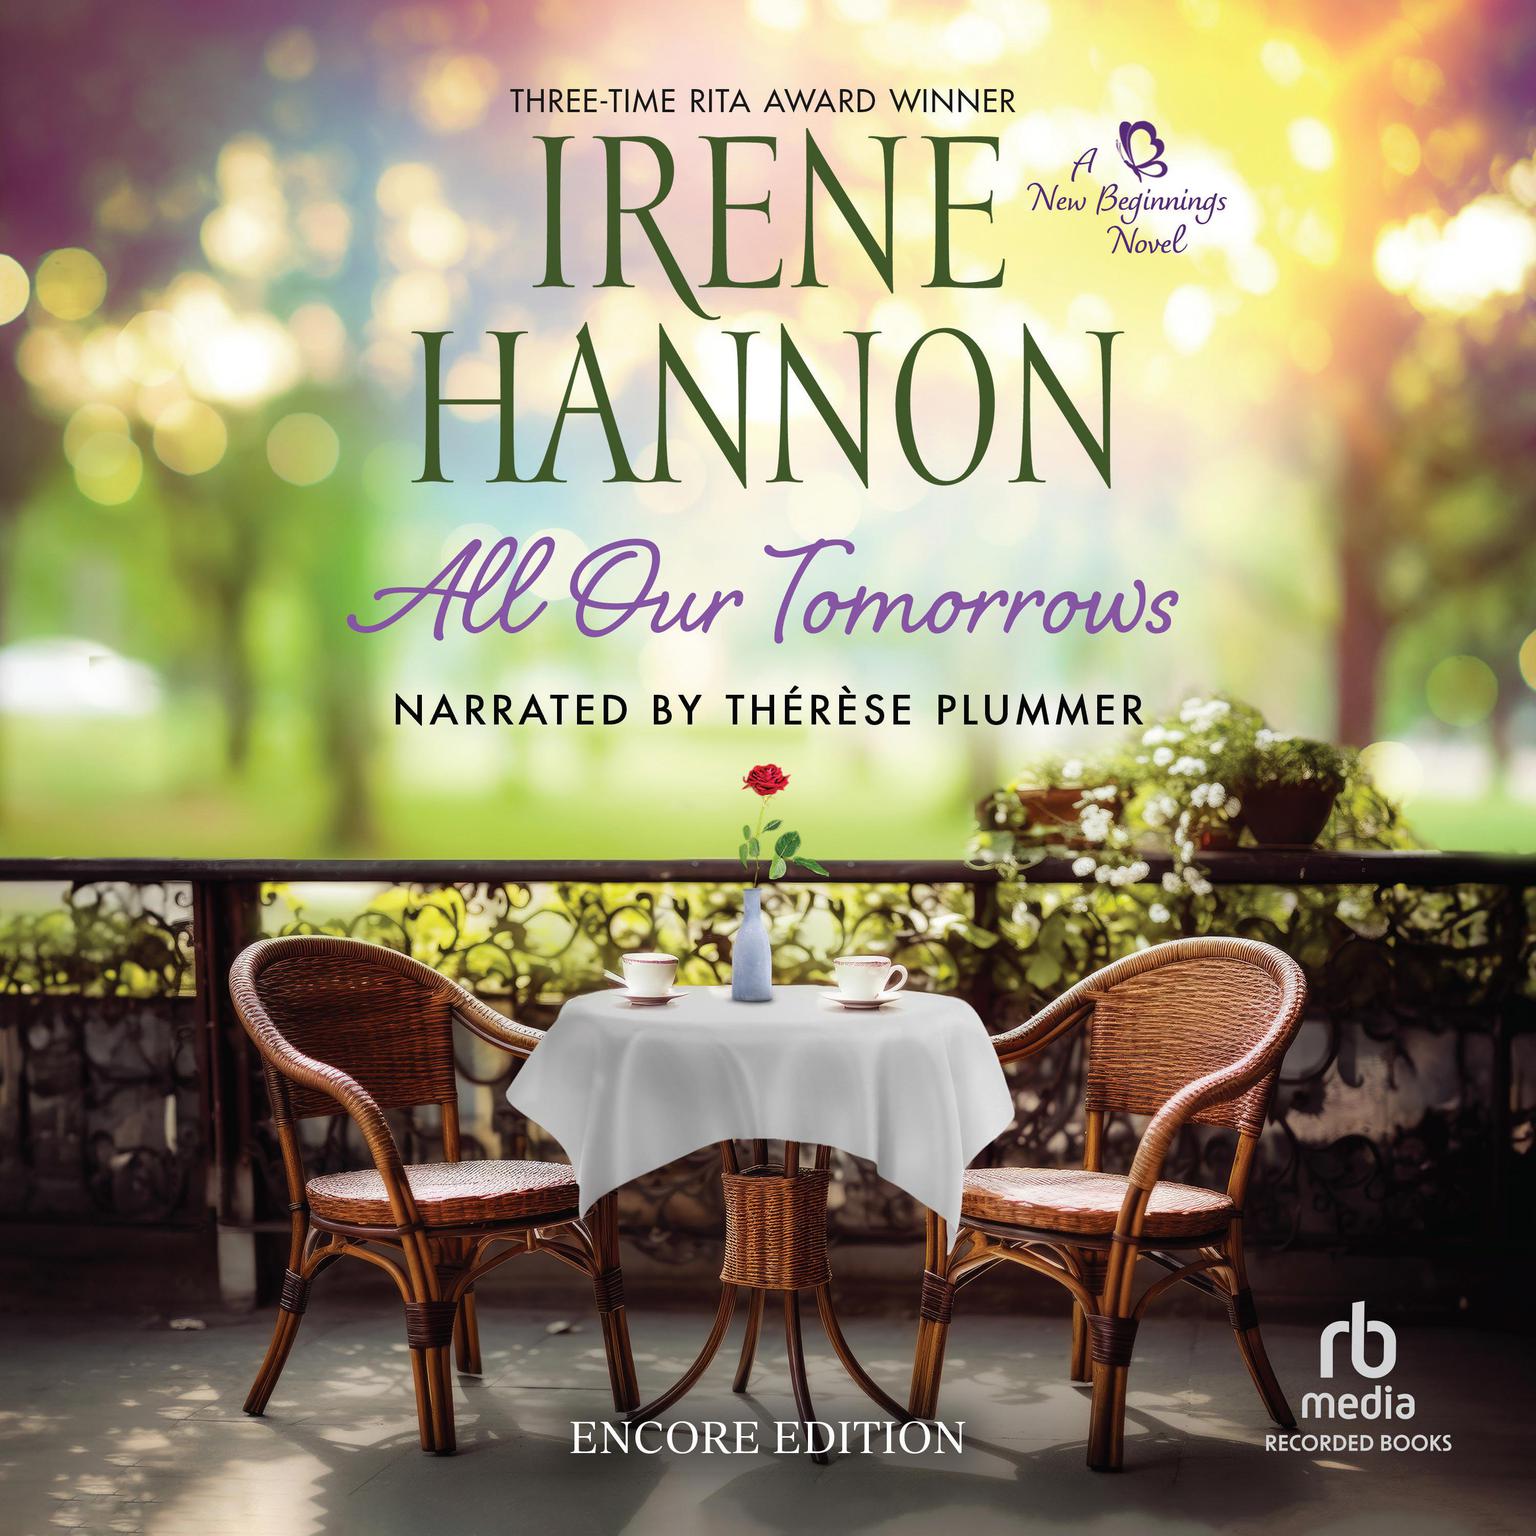 All Our Tomorrows (Encore Edition) Audiobook, by Irene Hannon